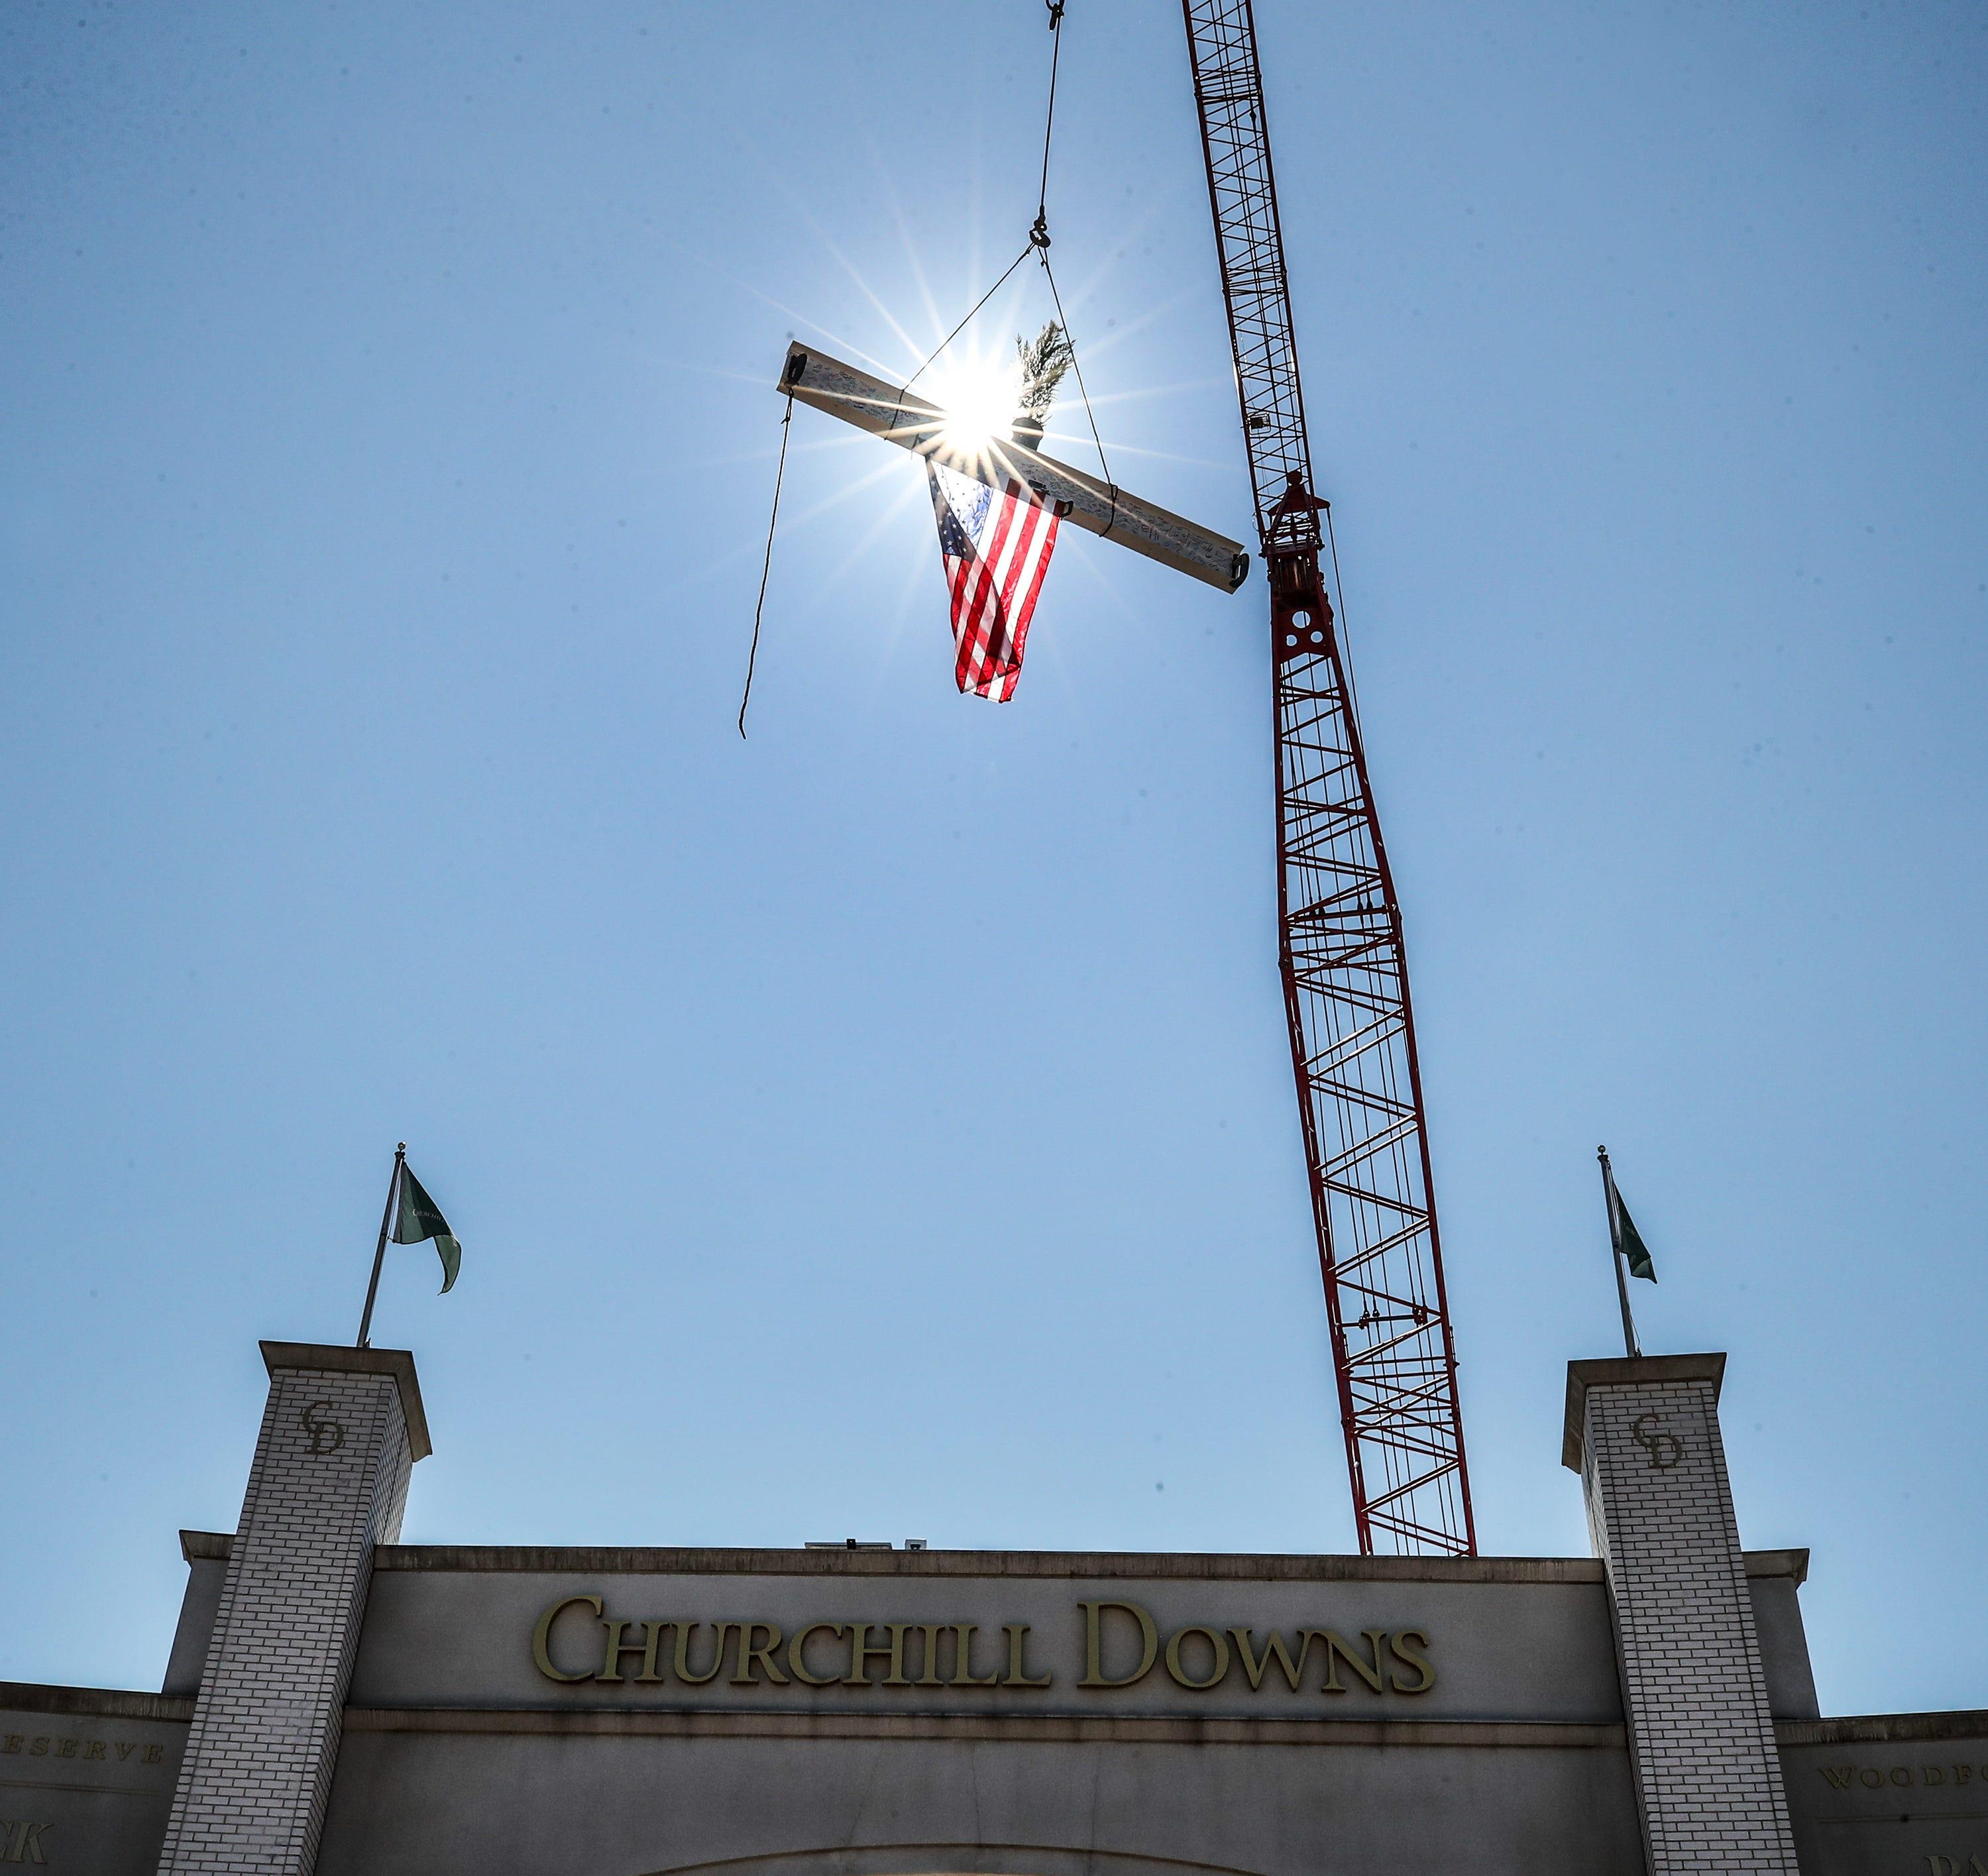 Workers at Churchill Downs lift a beam into place to complete the “Topping Off” ceremony to lower the final piece of steel into place marking a milestone in the completion of a renovated paddock at the track. Wednesday, September 13, 2023